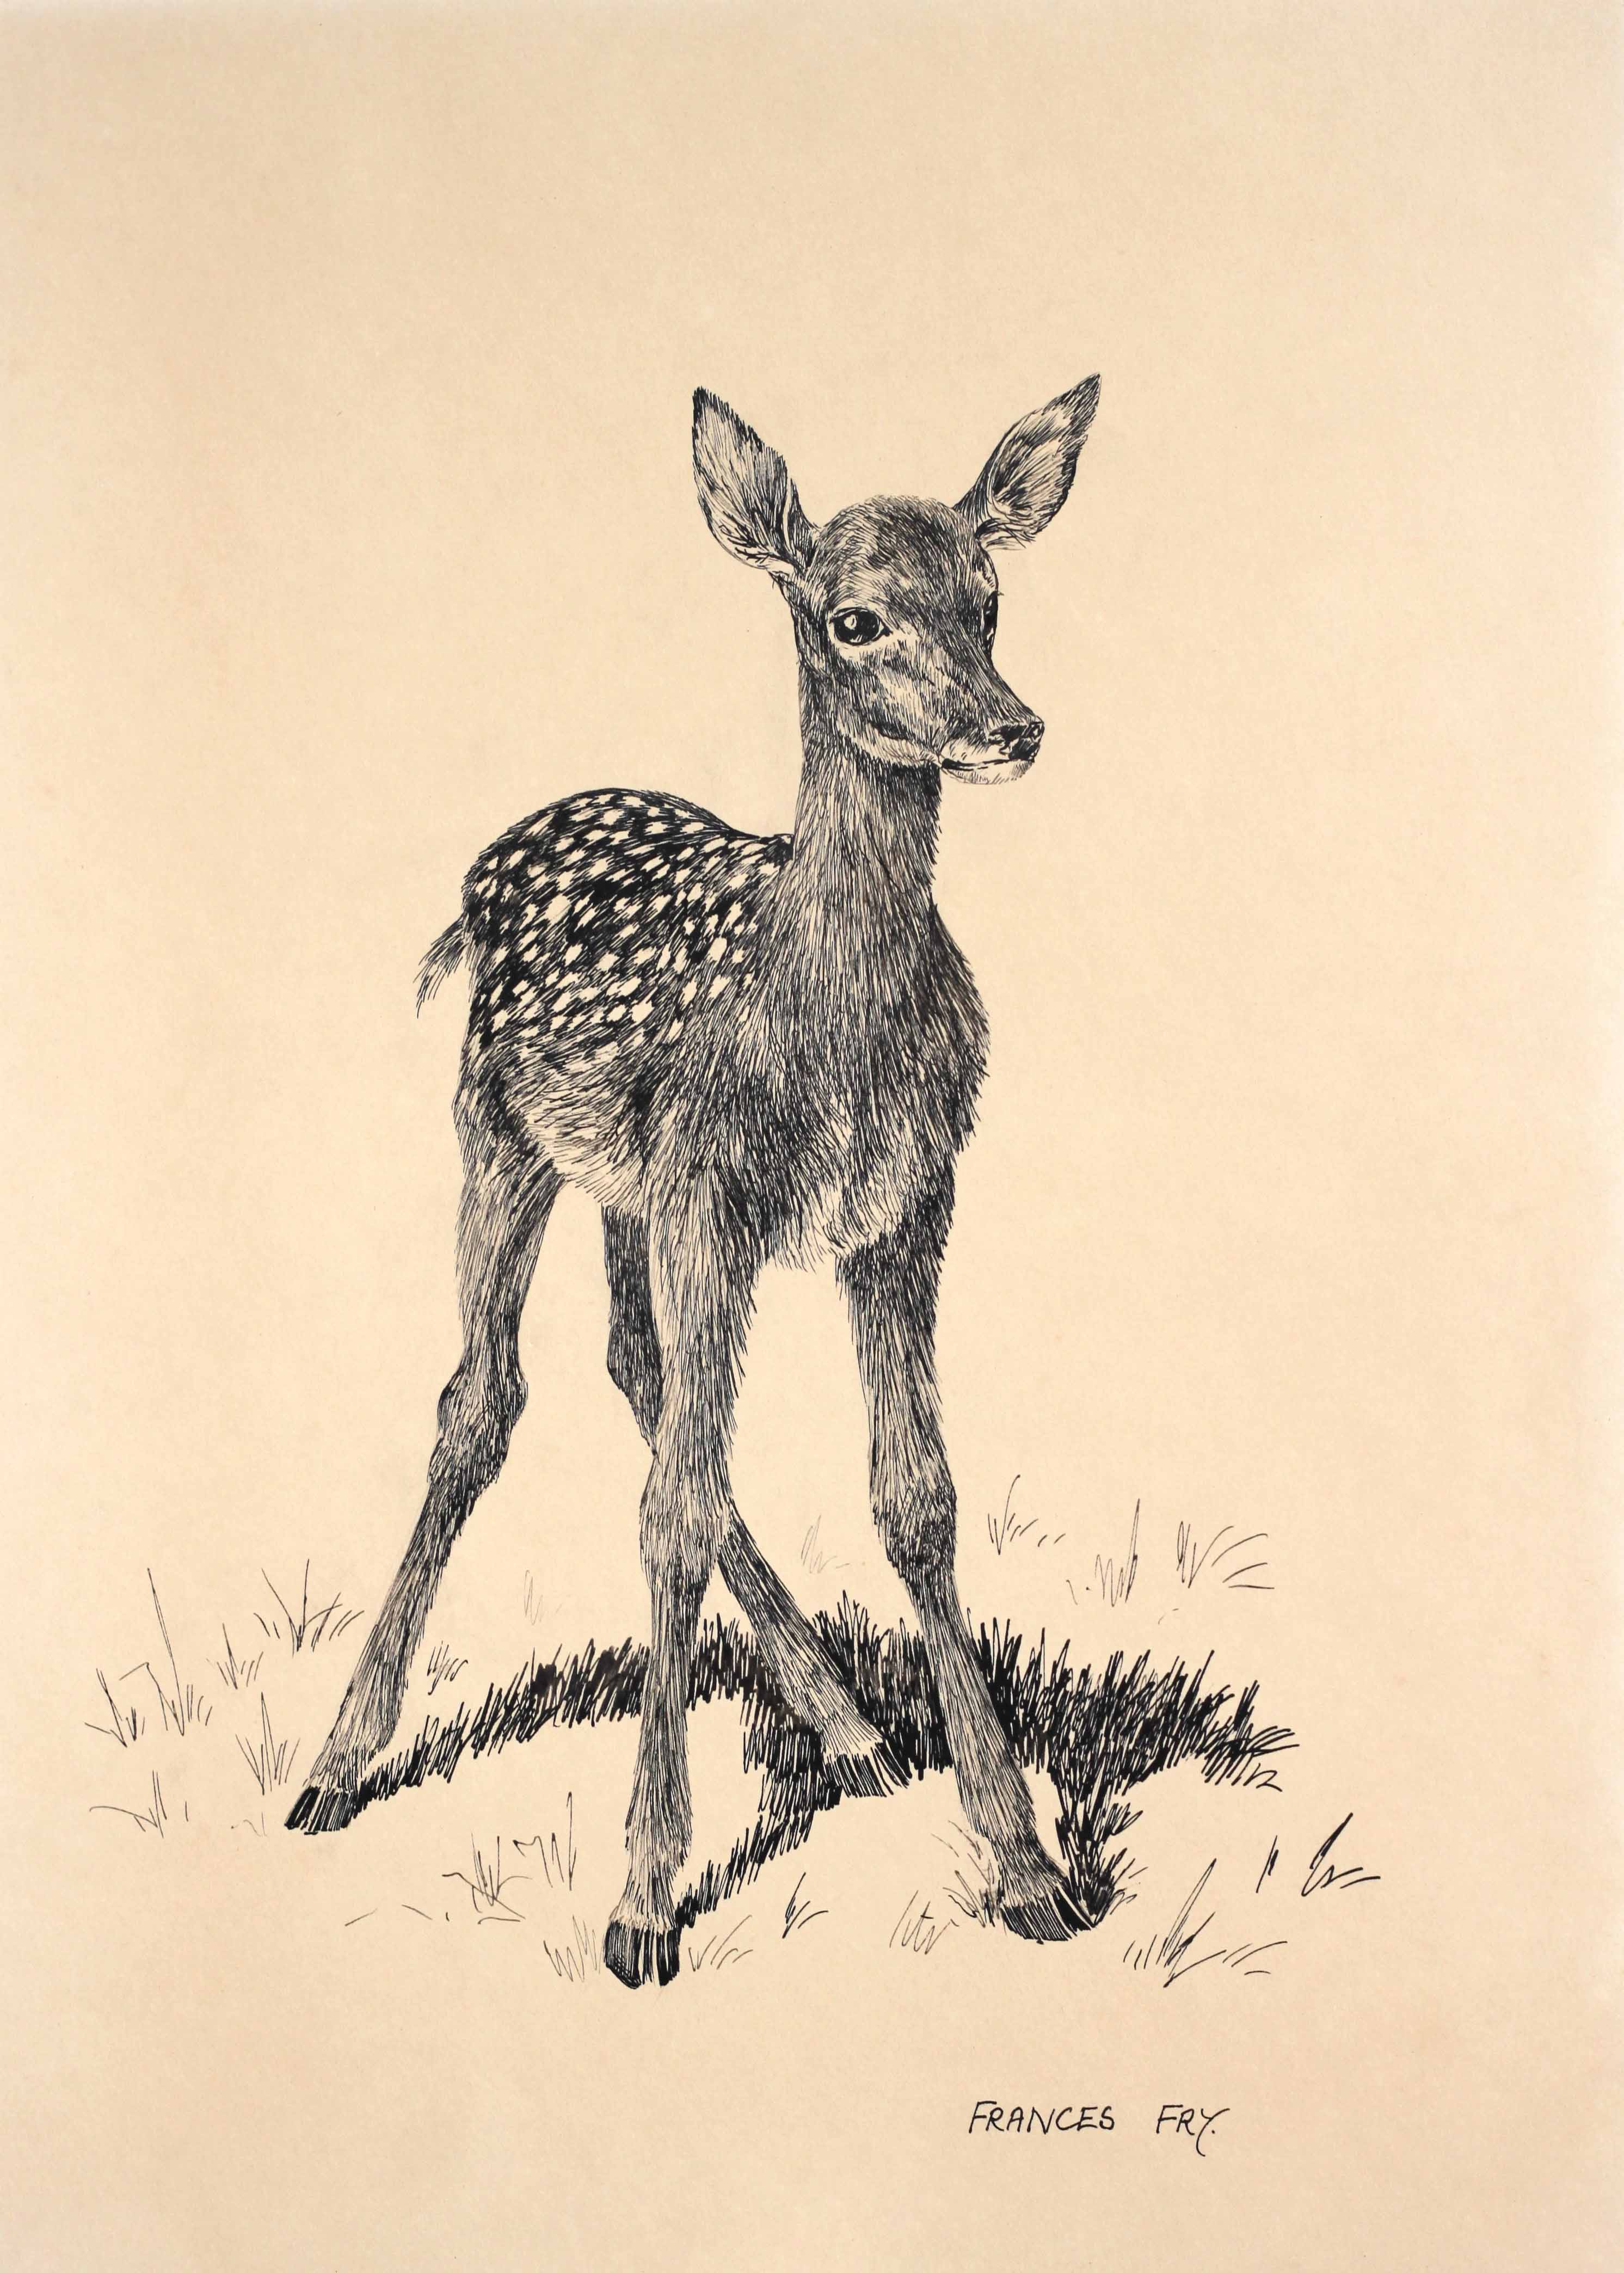 Click to see full size: Pen and Ink on card of a young fallow deer by Frances Fry- Pen and Ink on card of a young fallow deer by Frances Fry